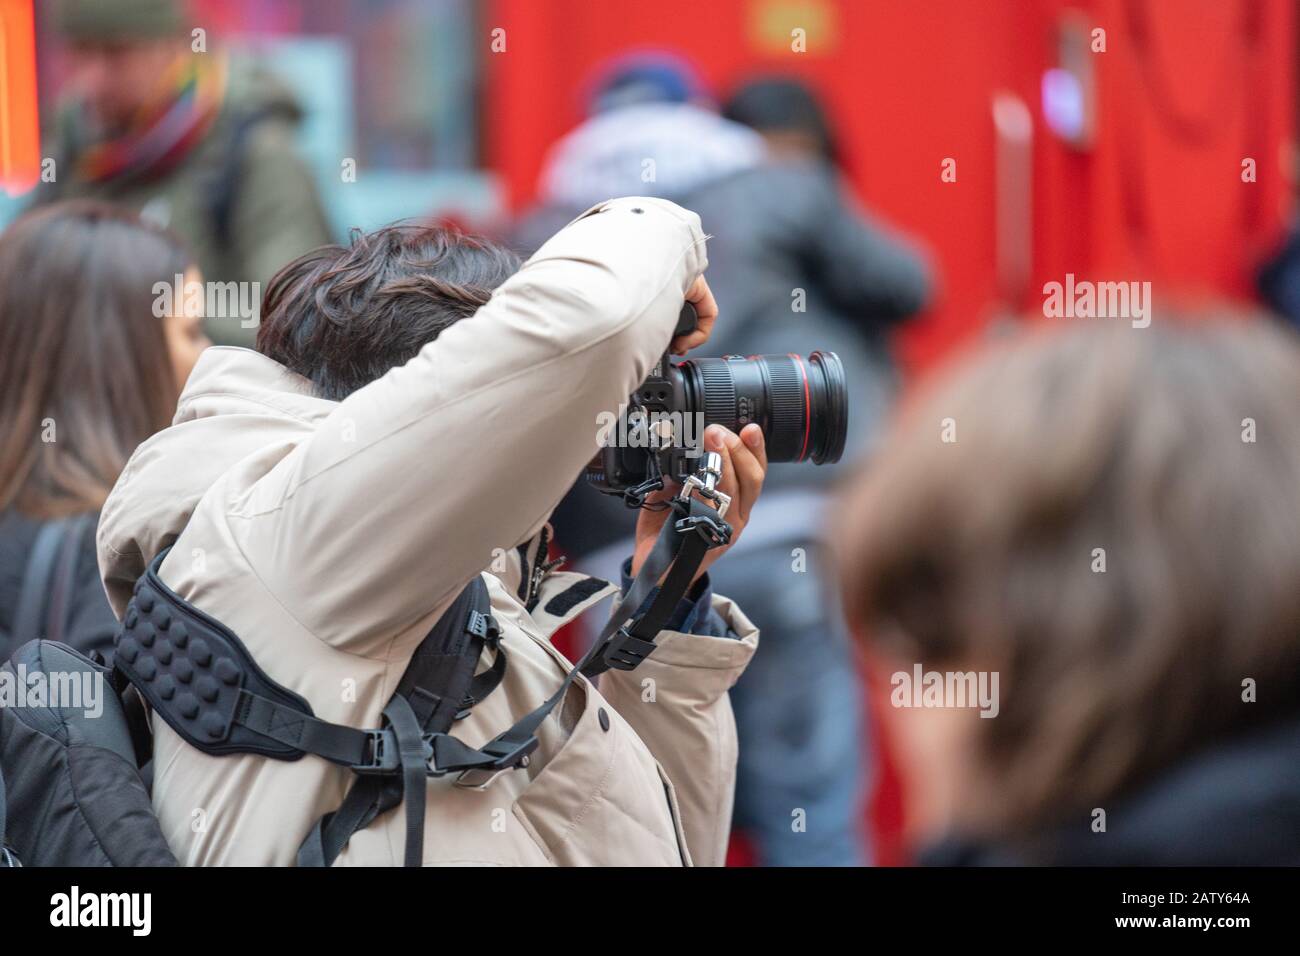 London, January 26, 2020. Photographer taking photos in London Chinatown. Chinese New Year Celebrations. Selective focus Stock Photo